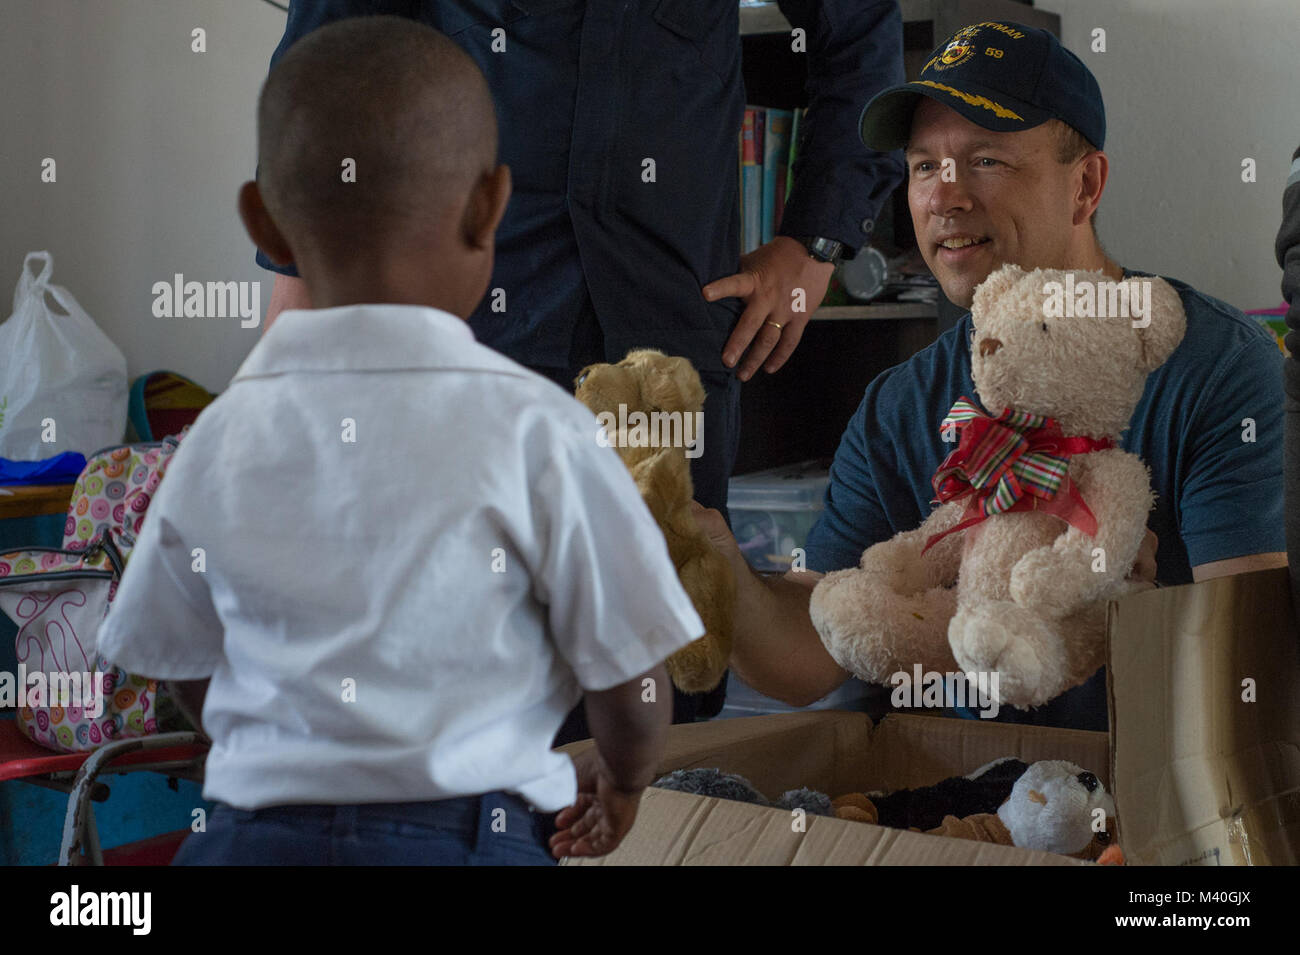 150216-N-IG780-168 CARTAGENA, Colombia (Feb. 16, 2015) Cdr. Michael Concannon, commanding officer of the guided-missile frigate USS Kauffman (FFG 59), gives a child a stuffed animal during a community service project. Kauffman is underway in support of Operation Martillo, a joint operation with the U.S. Coast Guard and partner nations within the 4th Fleet area of responsibility. (U.S. Navy photo by Mass Communication Specialist 3rd Class Shane A. Jackson/Released) 150216-N-IG780-168 by ussouthcom Stock Photo